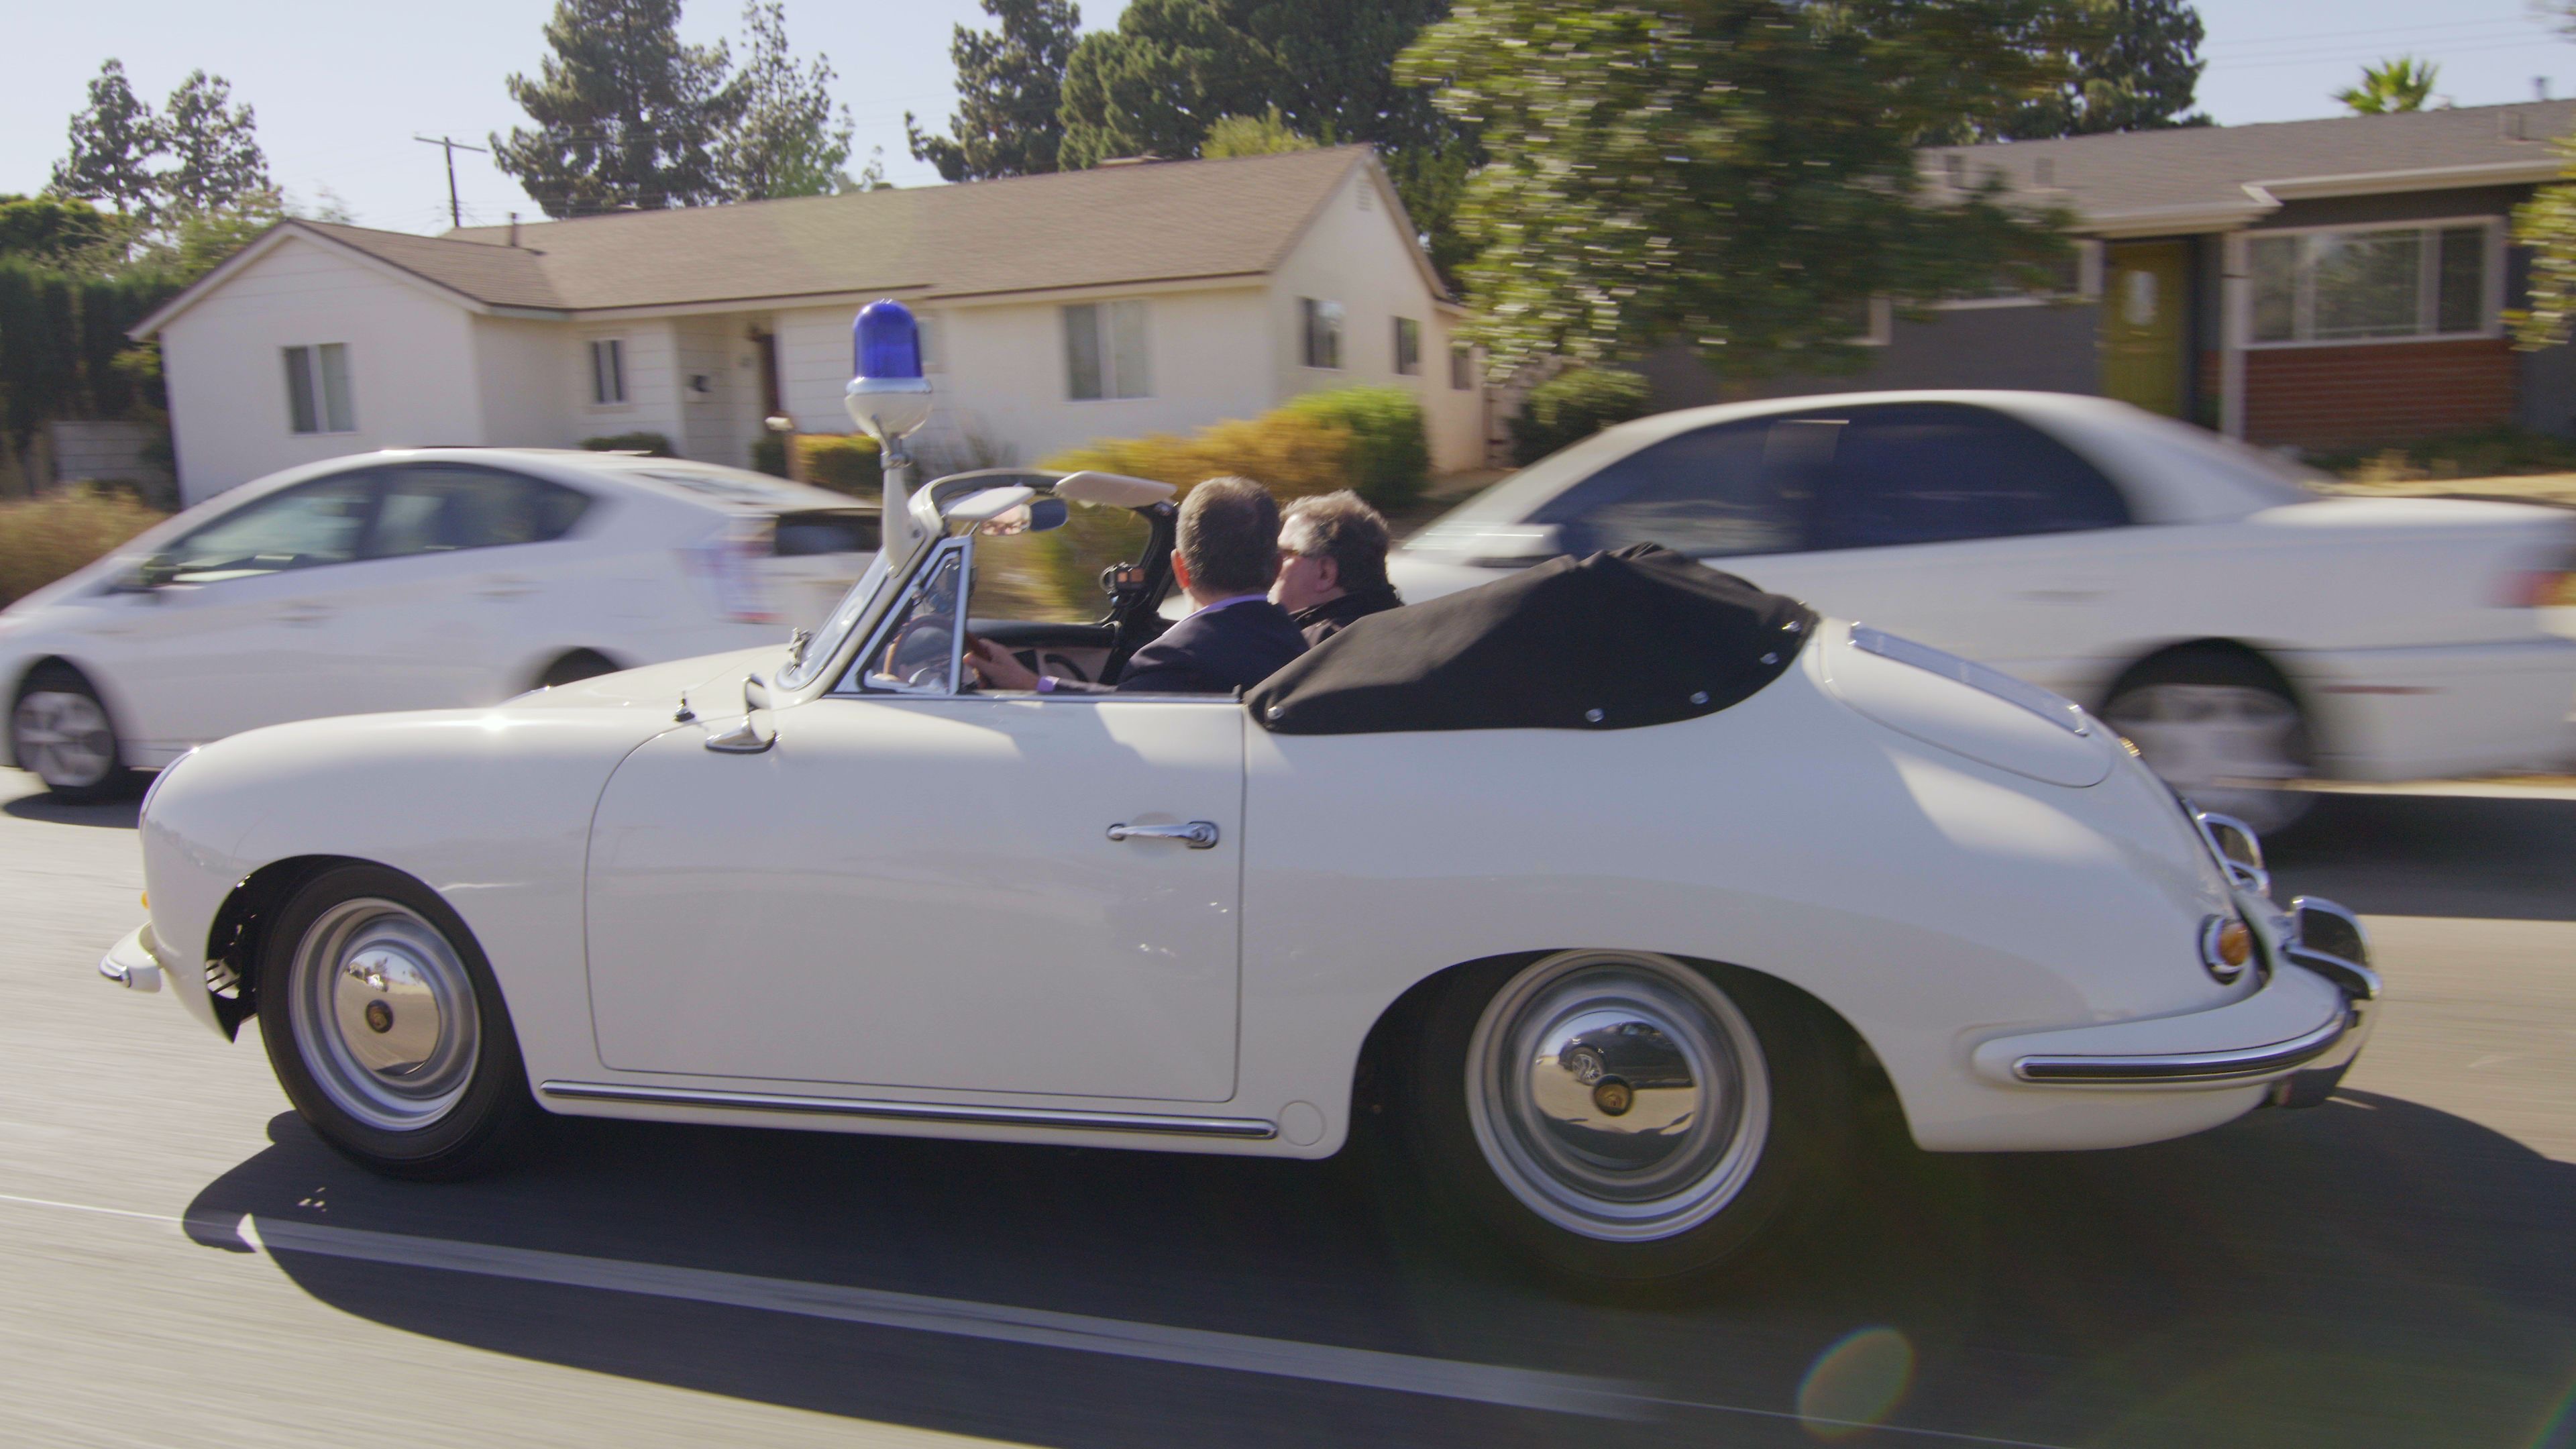 Seinfeld, Seinfeld’s ‘Comedians in Cars’ launches 11th season on July 19, ClassicCars.com Journal